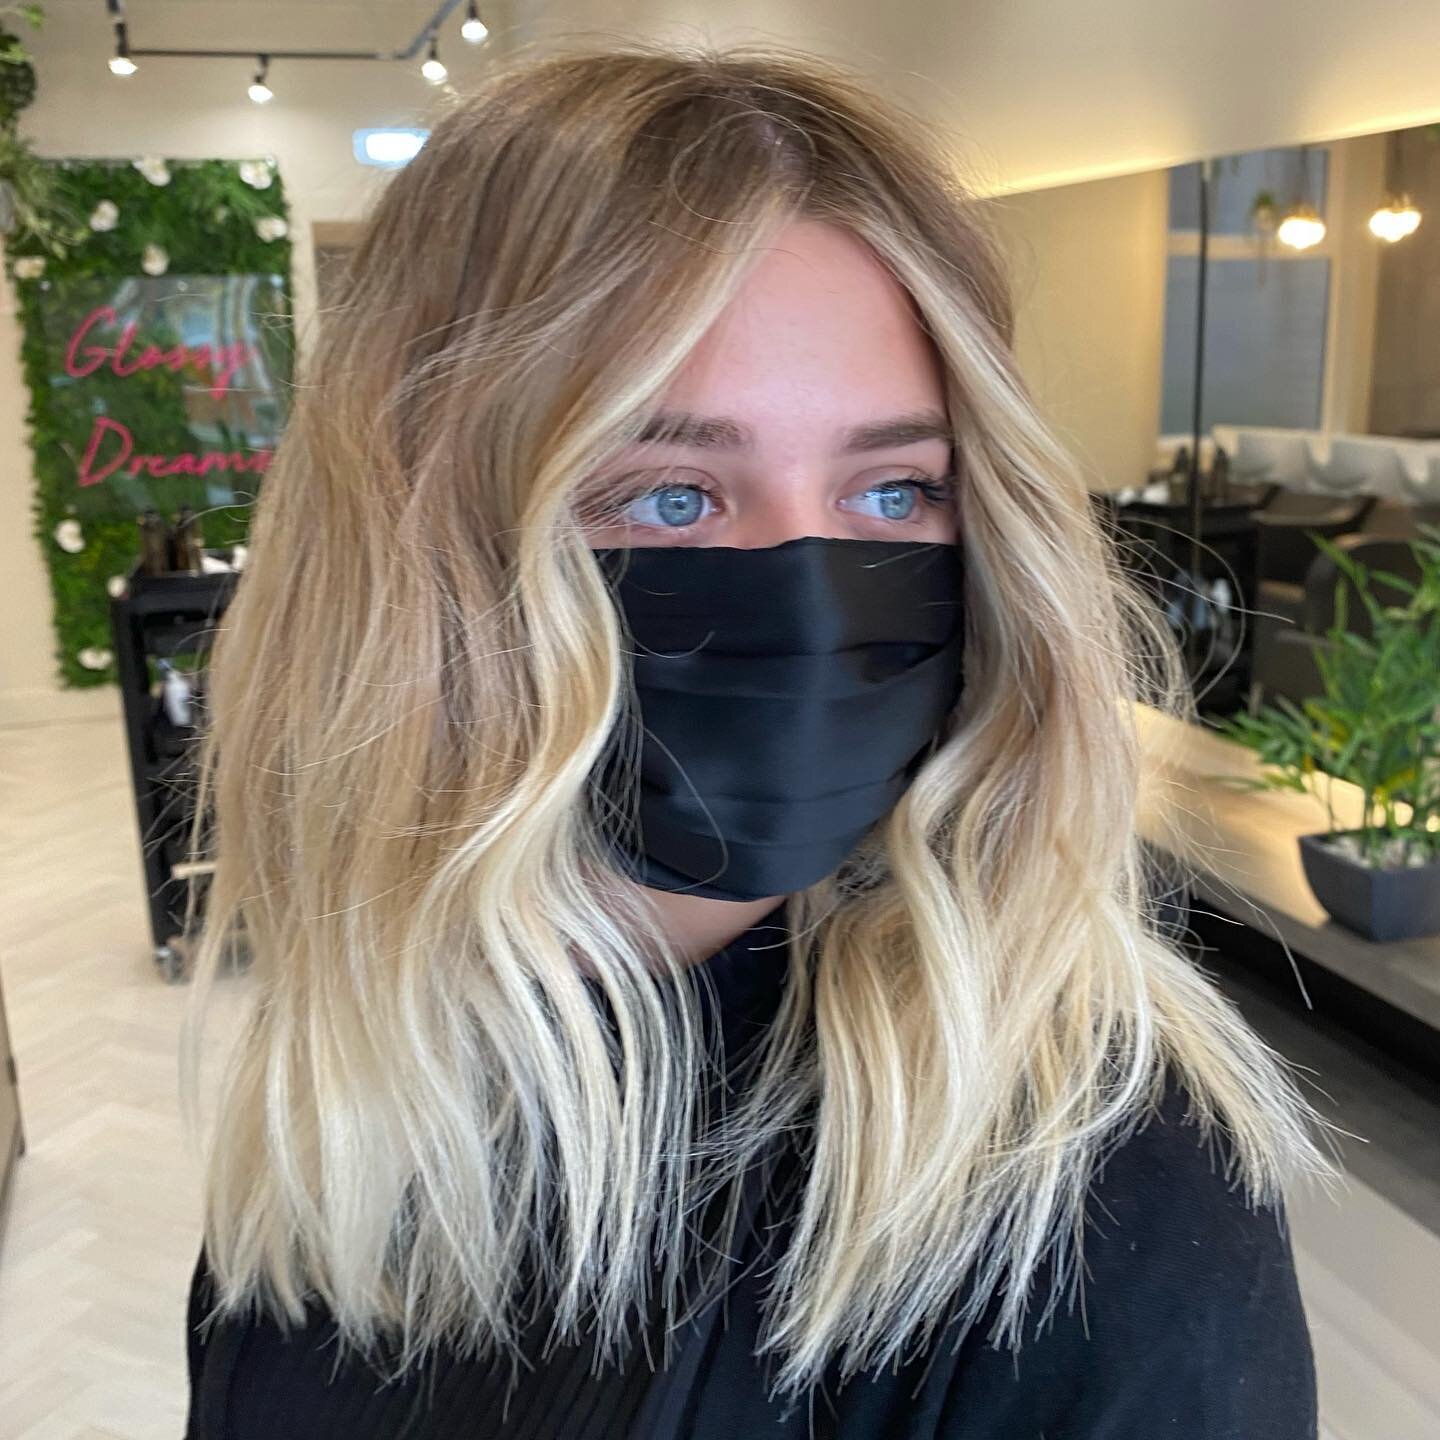 We&rsquo;re back baby!

And, with the blue eyed beauty... extreme refresh and brighten using the new #lorealpro #metaldetox service.

Prepare to be spammed!

#lorealeducationuki #csconnective #redken #haircolour #hairofinstagram #fleetwood